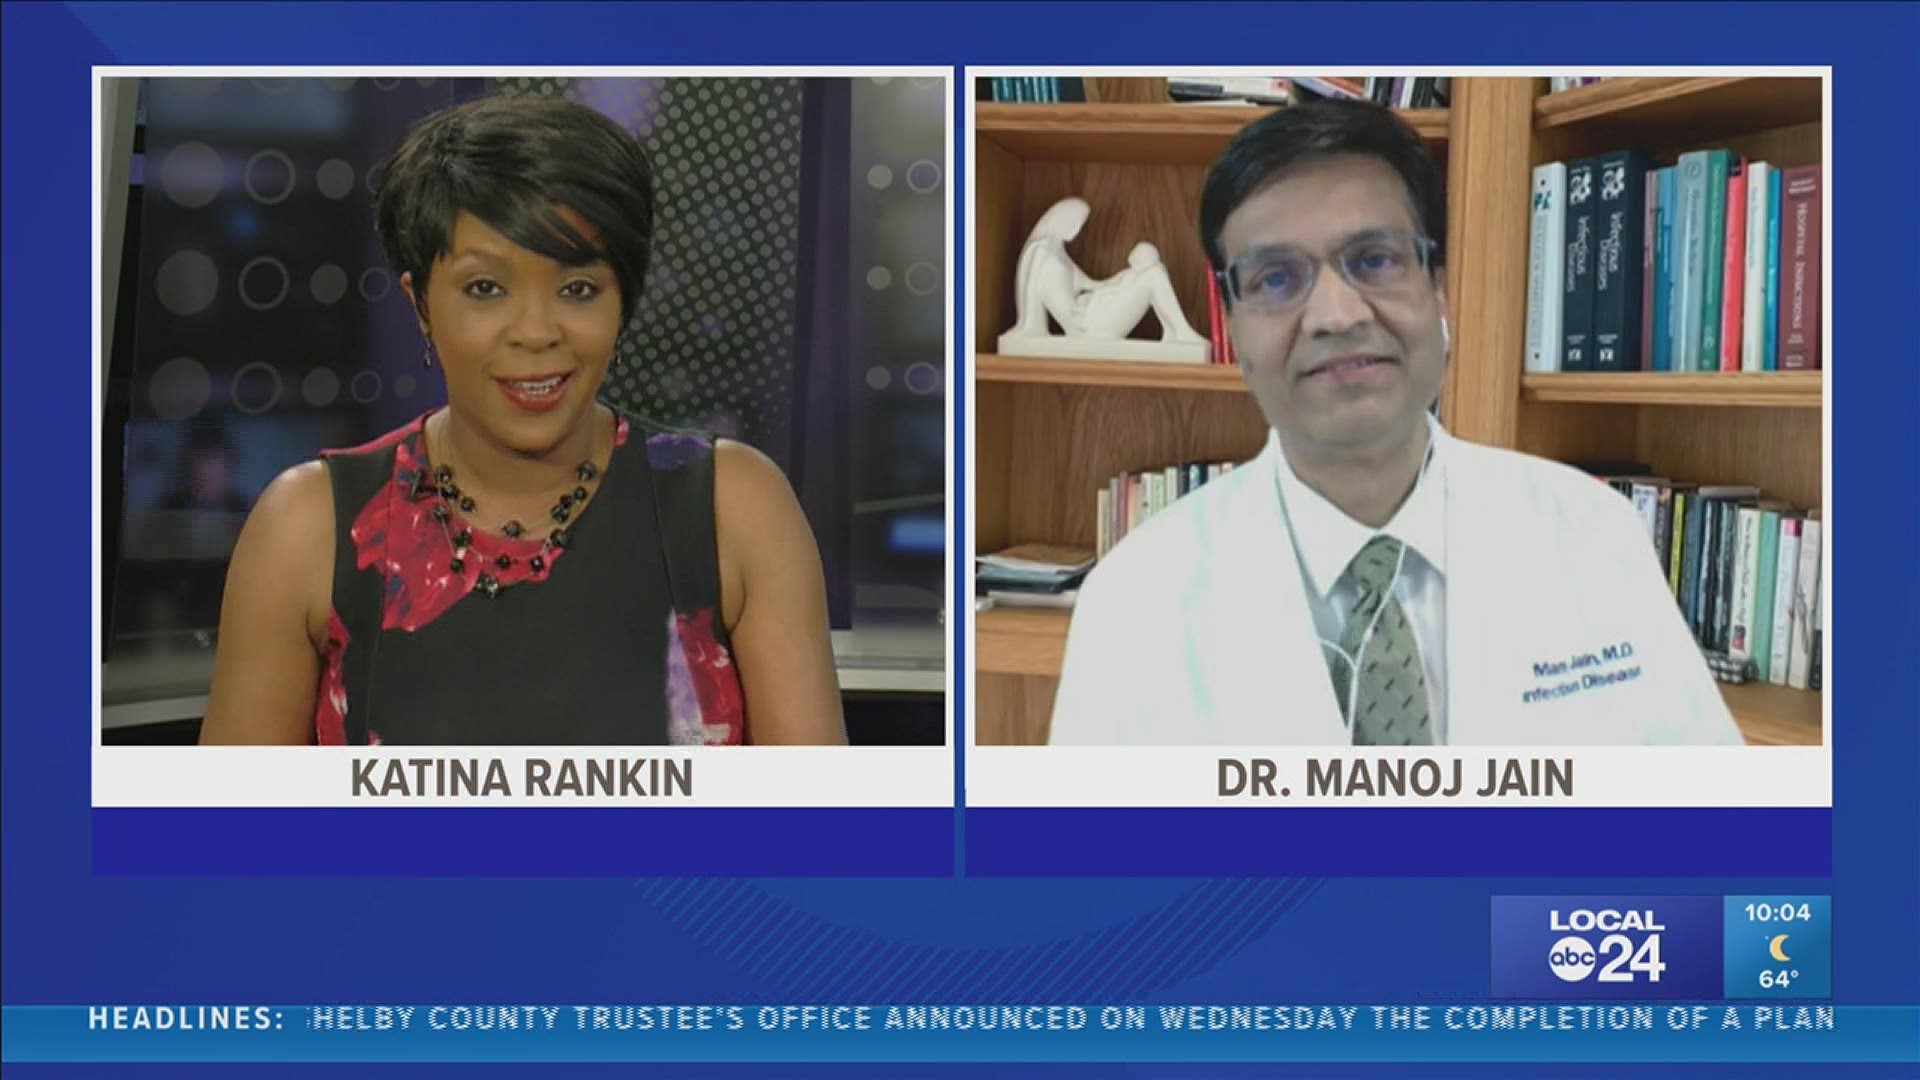 Dr. Manoj Jain goes one-on-one with Local 24 News anchor Katina Rankin to answer COVID-19 vaccine questions